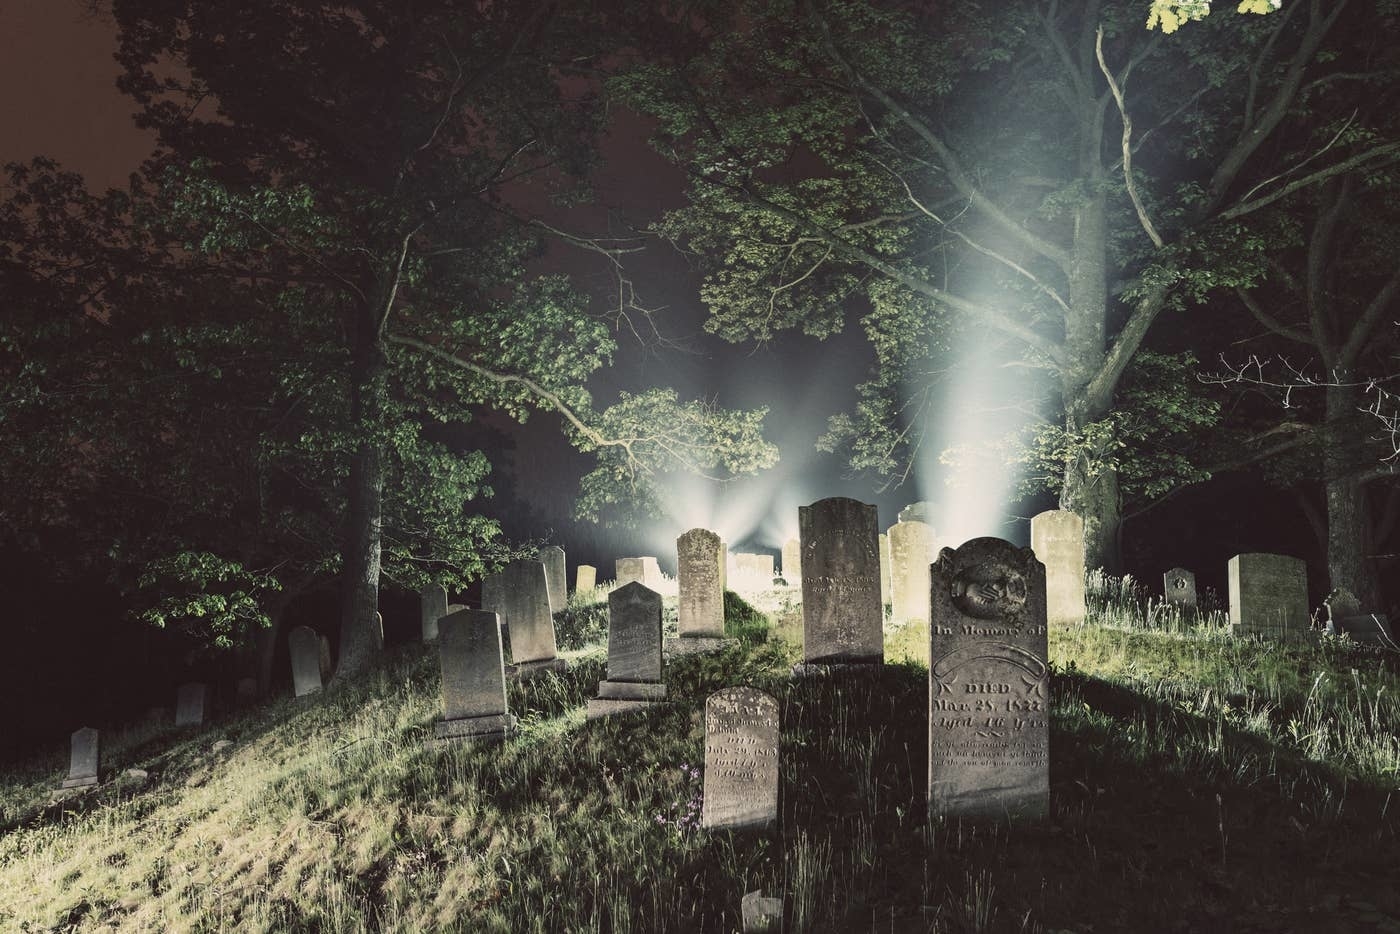 Grave stones are illuminated in a cemetery at night.